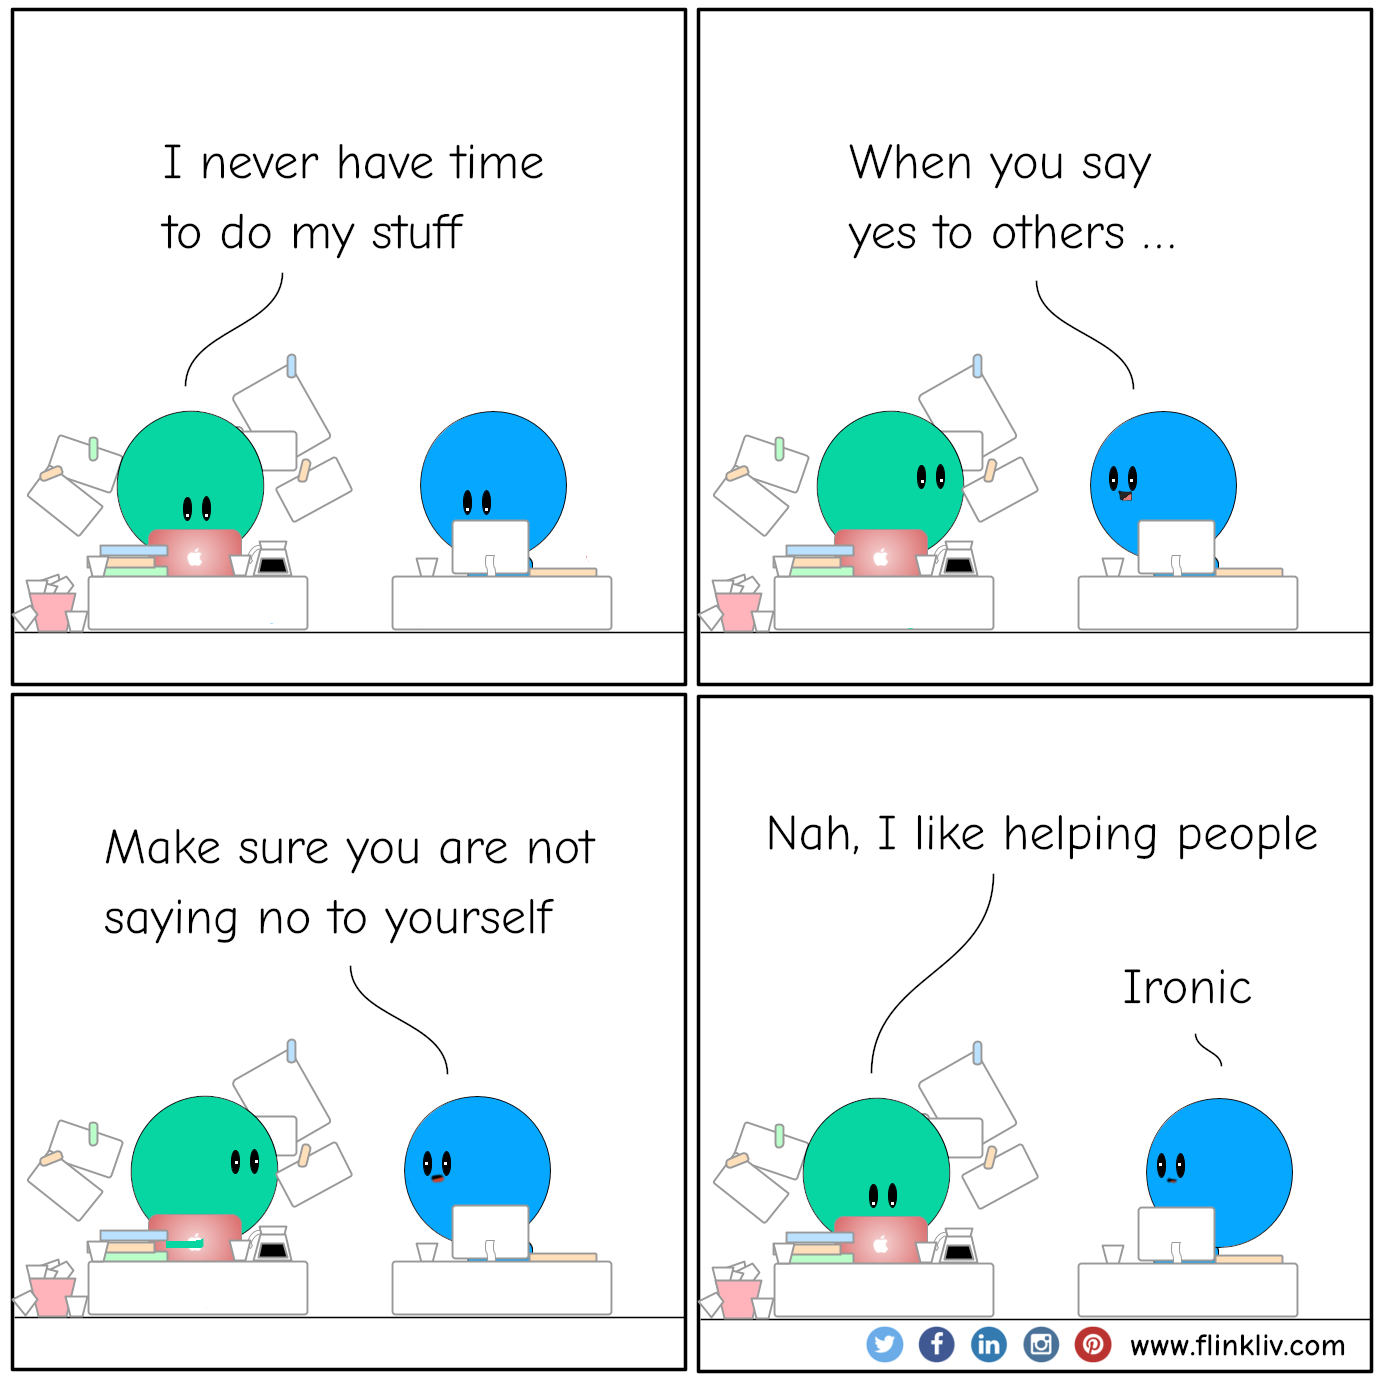 Conversation between A and B about how to balance between helping other and ourselves. 
				A: I never have time to do my stuff.
				B: When you say yes to others, make sure you are not saying no to yourself
				A: Nah, I like helping people
				B: Ironic. 
			